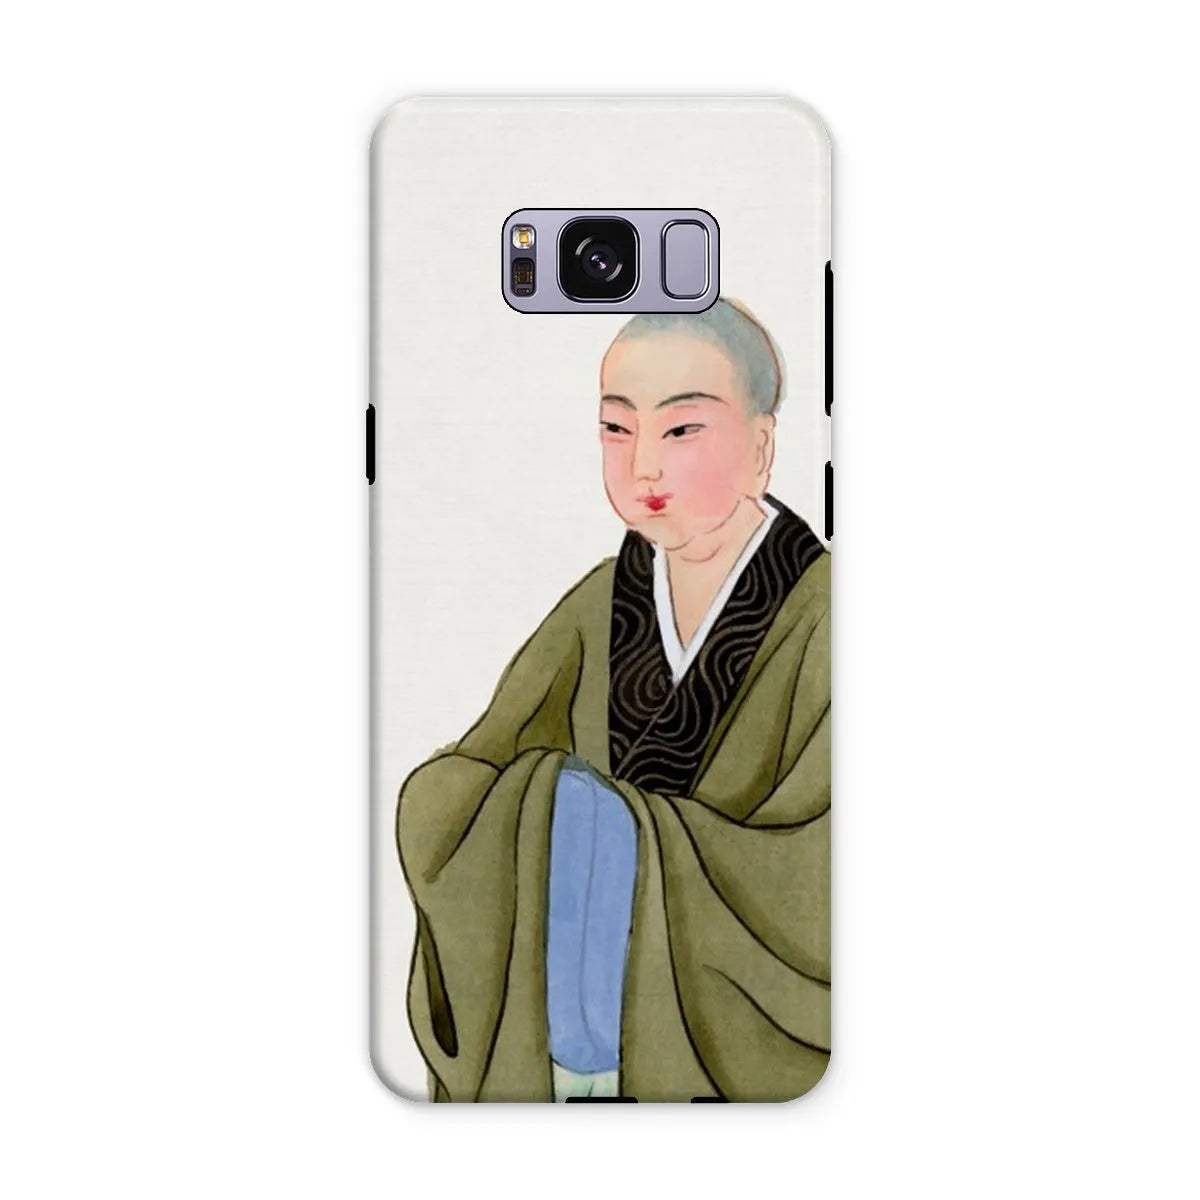 Buddhist Monk - Manchu Chinese Aesthetic Art Phone Case - Samsung Galaxy S8 Plus / Matte - Mobile Phone Cases